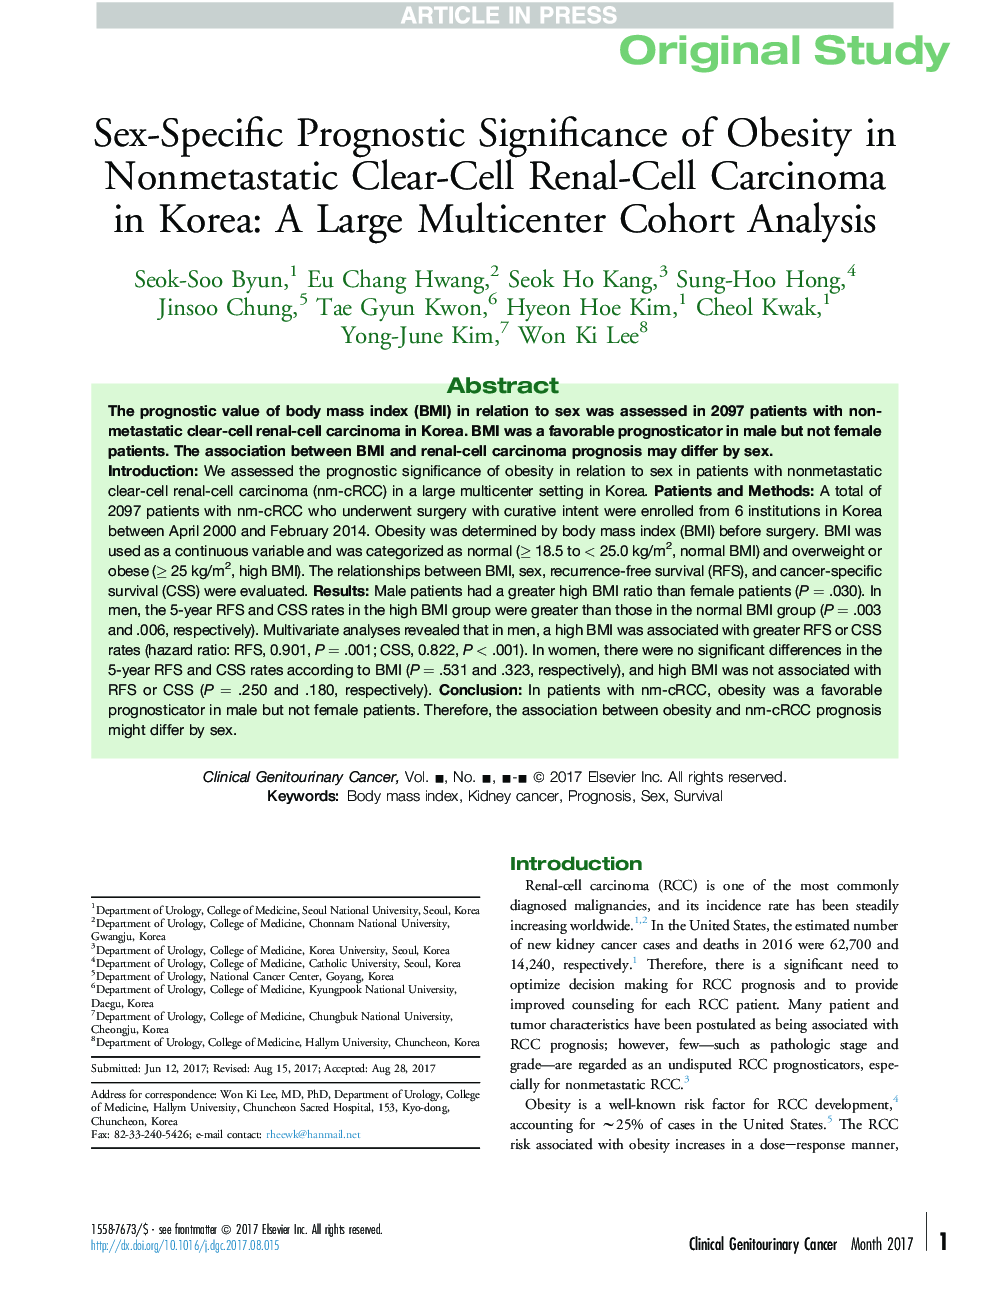 Sex-Specific Prognostic Significance of Obesity in Nonmetastatic Clear-Cell Renal-Cell Carcinoma in Korea: A Large Multicenter Cohort Analysis